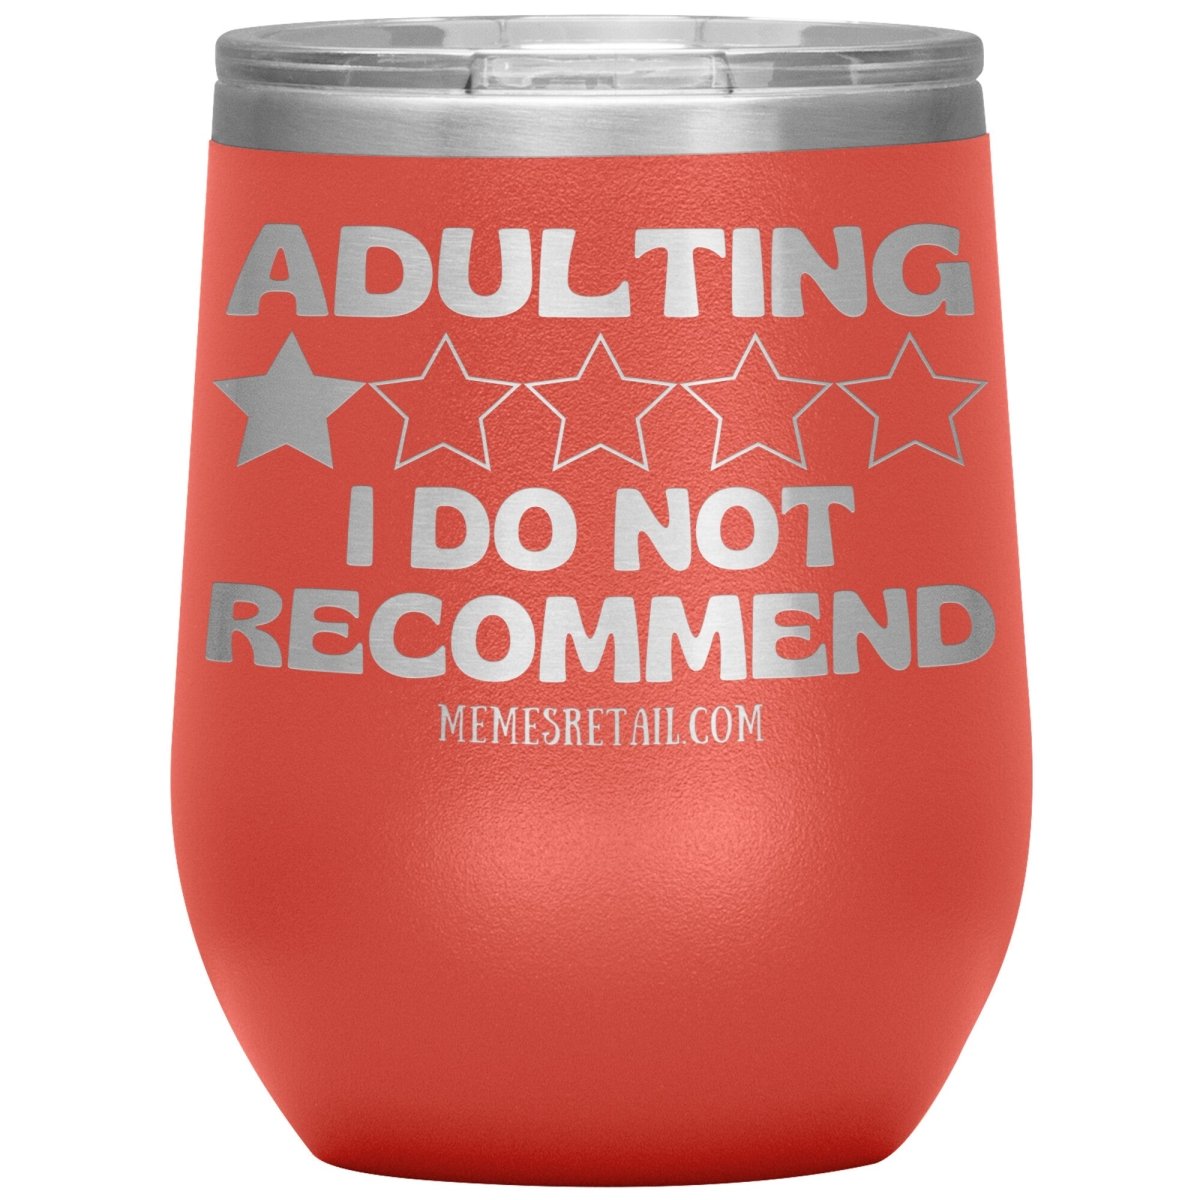 Adulting, I Do Not Recommend 12oz, 20oz, & 30oz Tumblers, 12oz Wine Insulated Tumbler / Coral - MemesRetail.com